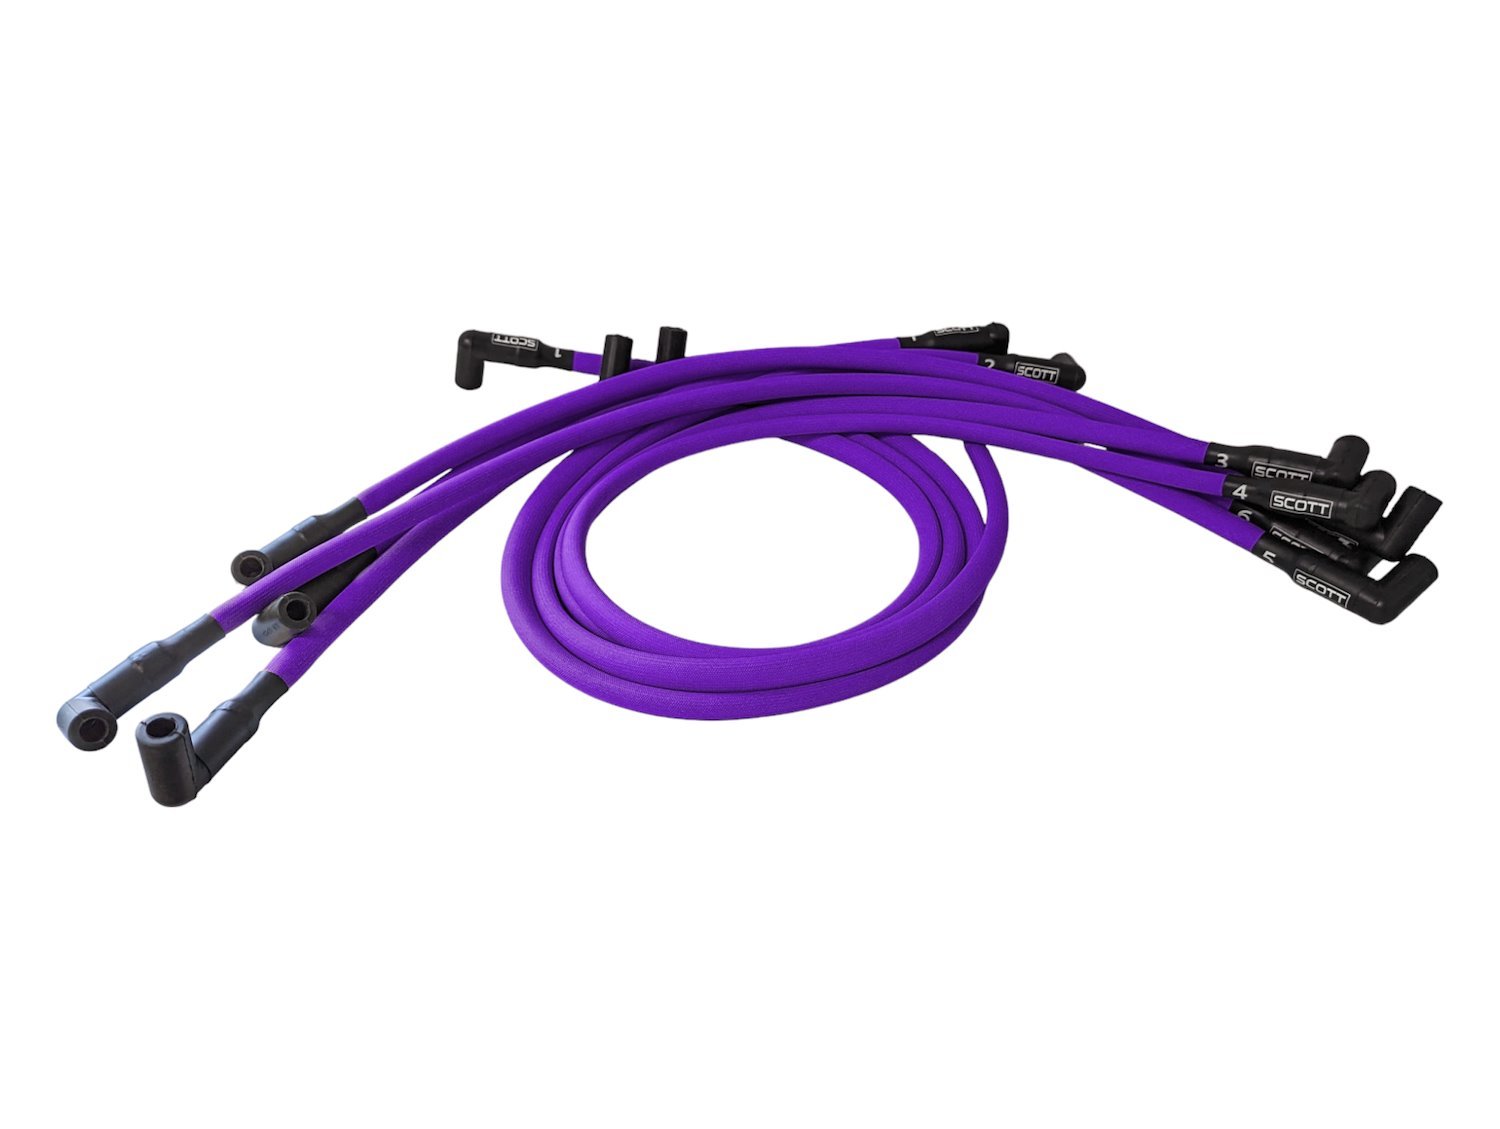 SPW-PS-407-7 High-Performance Fiberglass-Oversleeved Spark Plug Wire Set for Small Block Chevy, Under Header [Purple]